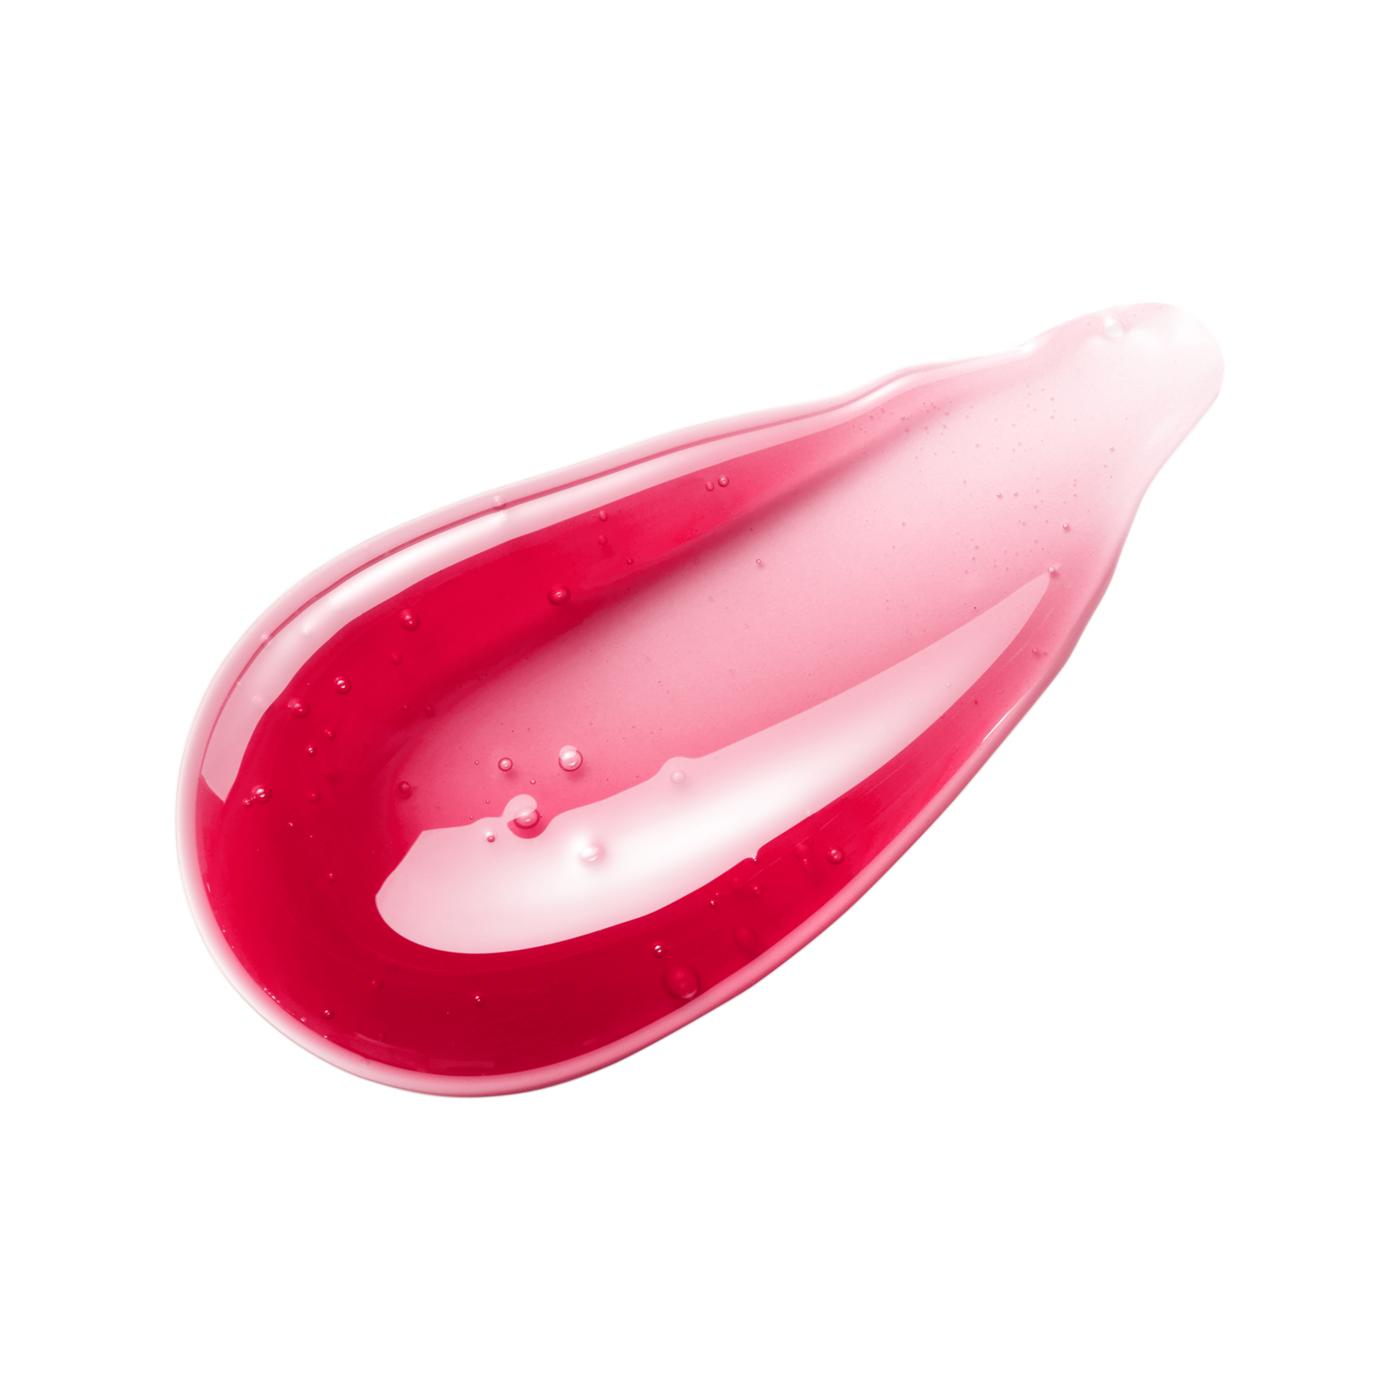 Covergirl Clean Fresh Yummy Lip Gloss - You're Just Jelly; image 8 of 10